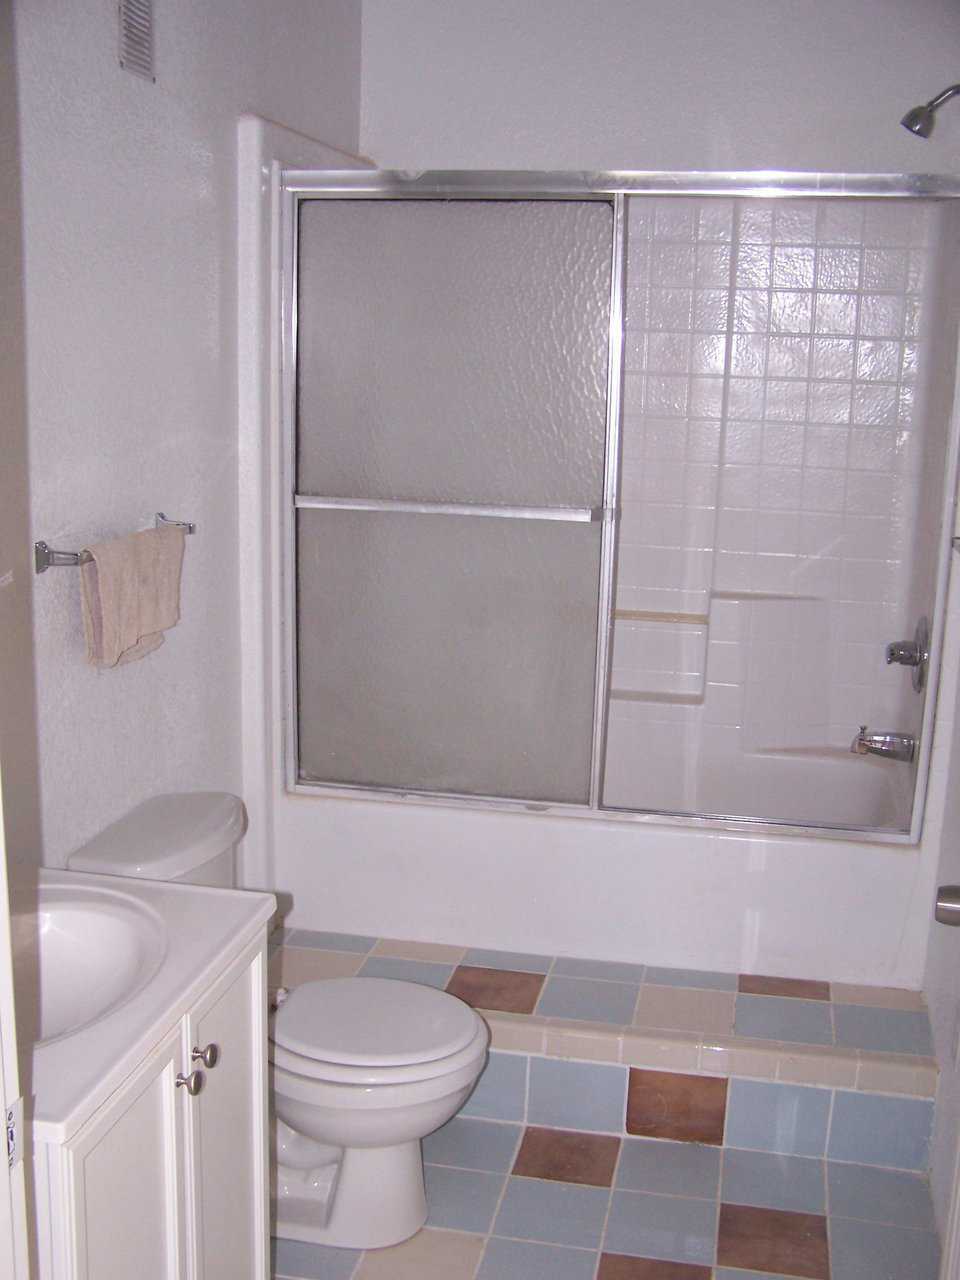 Guest bathroom — It includes a tub with an enclosed shower.